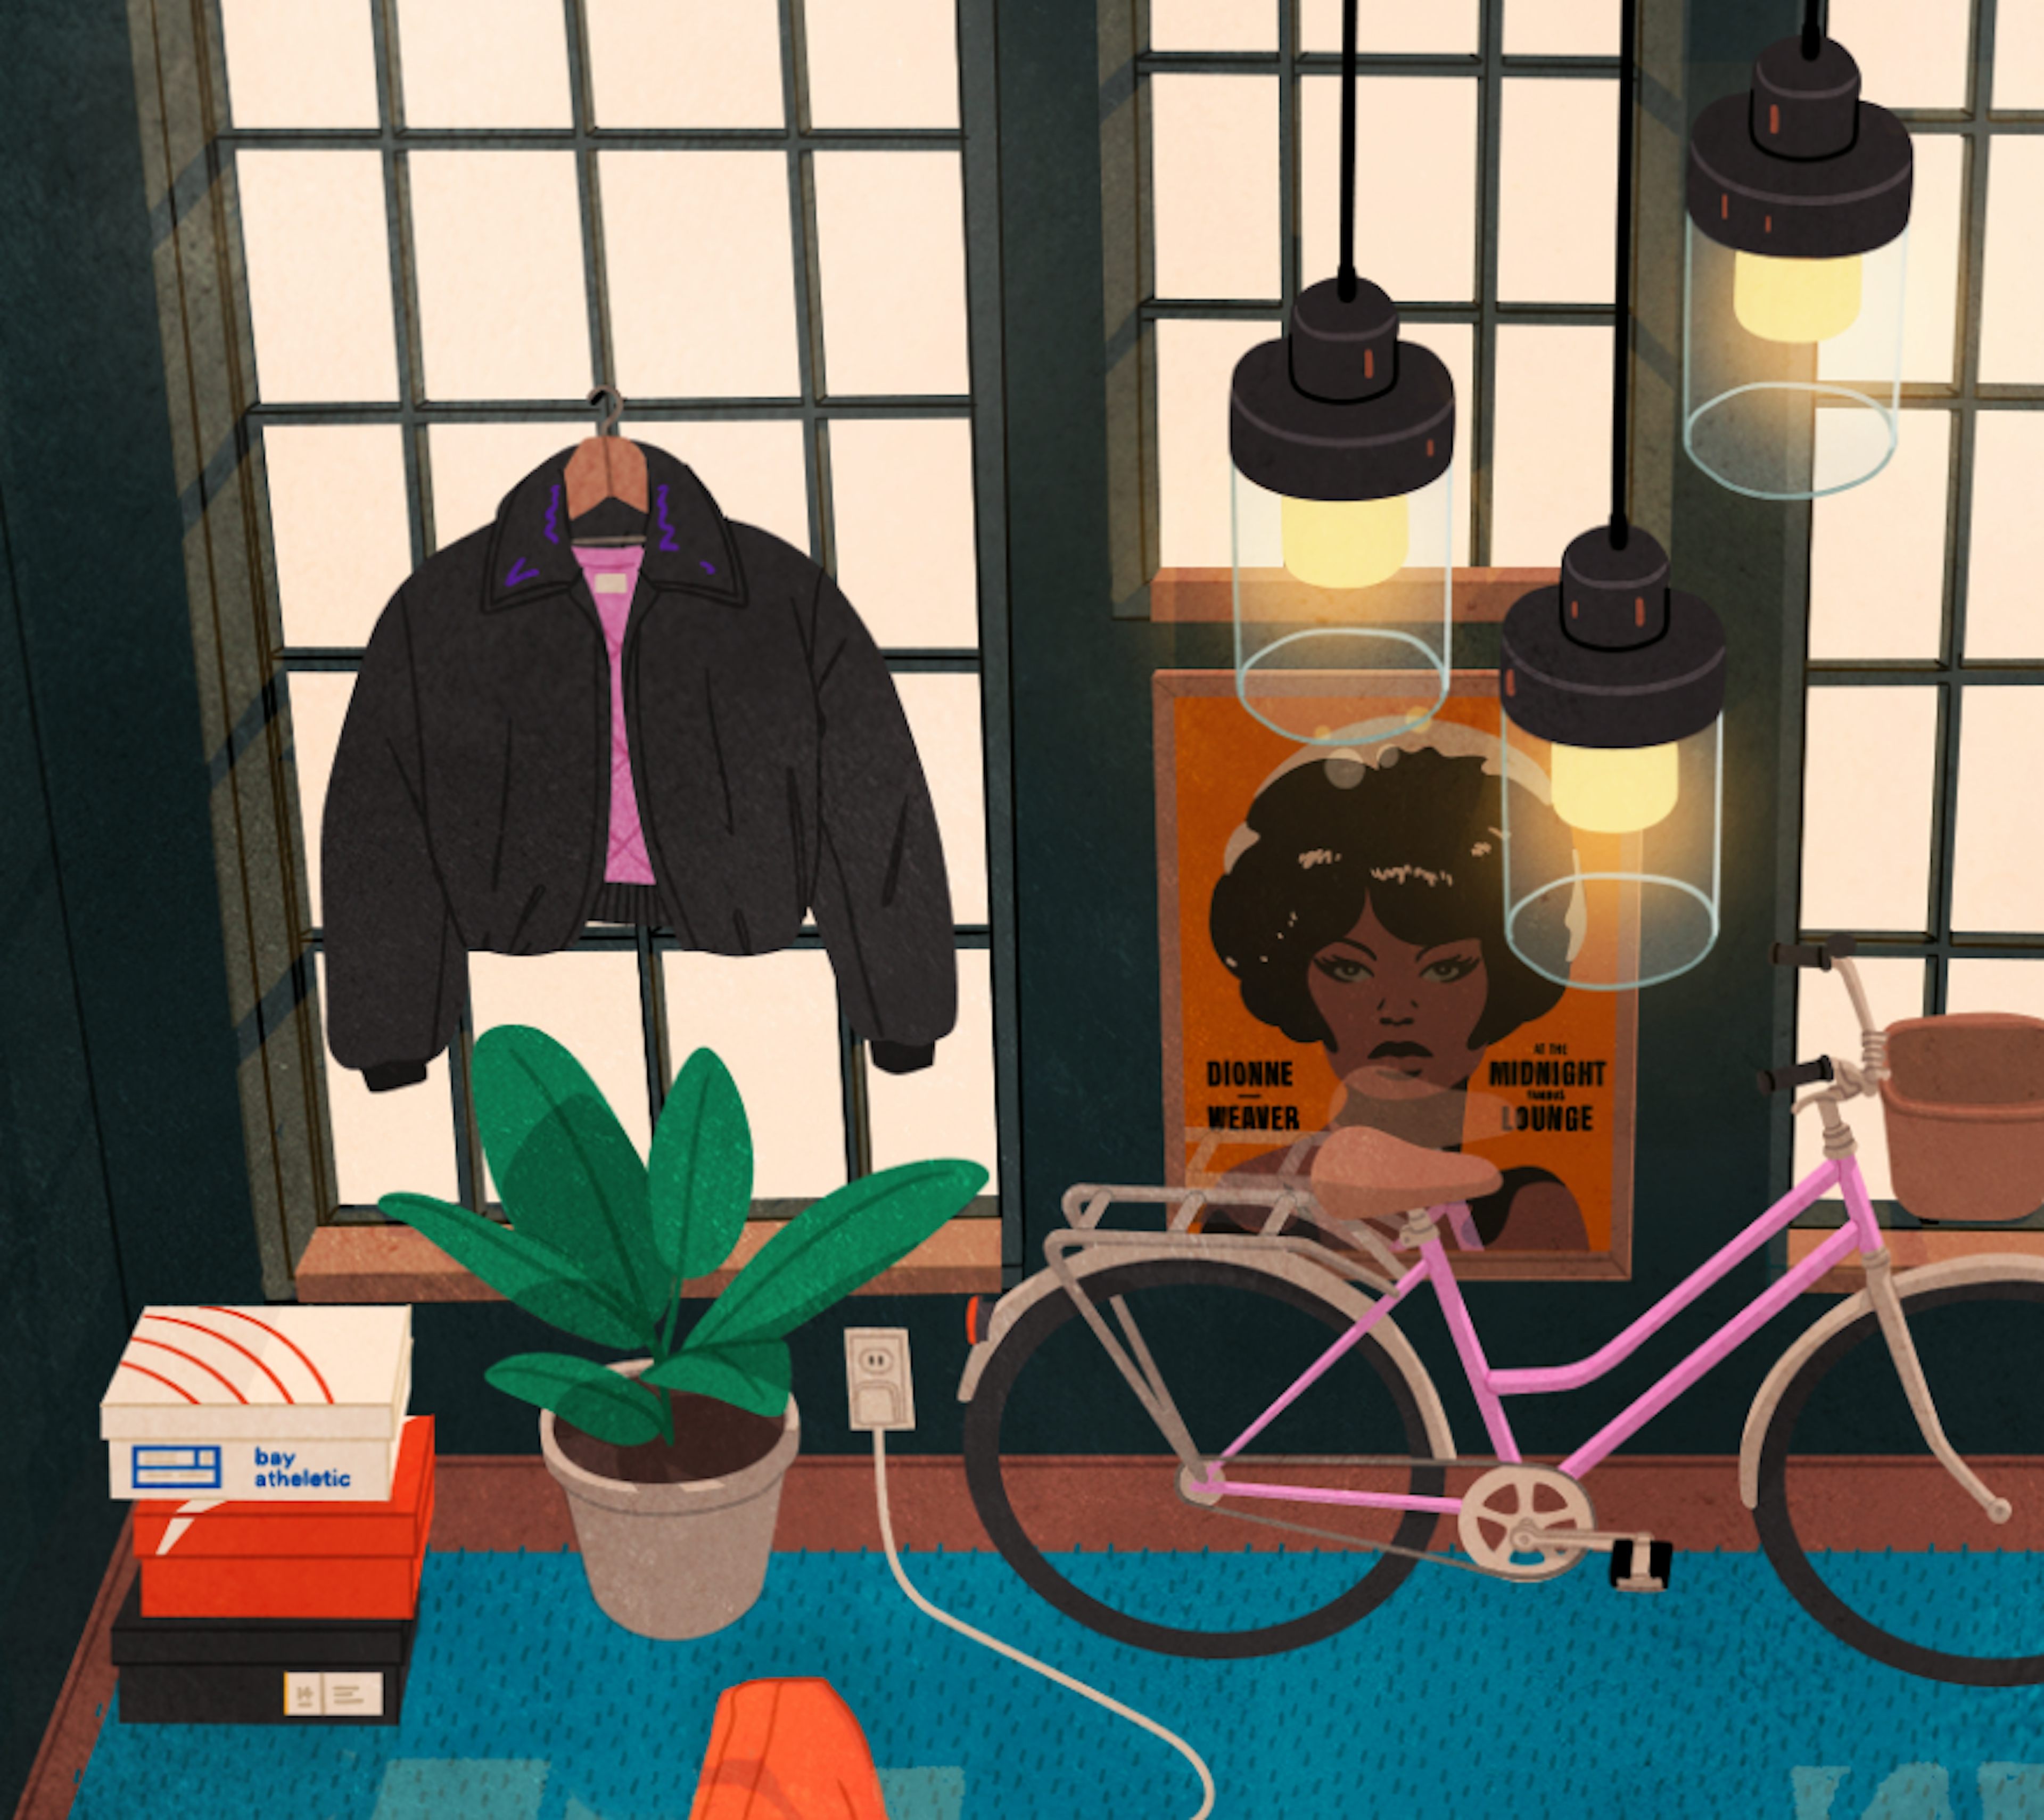 A black jacket is hanging on a window frame. Below it is a potted plant next to several stacked shoe boxes. Nearby, there is a pink bicycle leaning against the wall. Two pendant lights hang from the ceiling, and a poster featuring a woman’s portrait is on the wall.